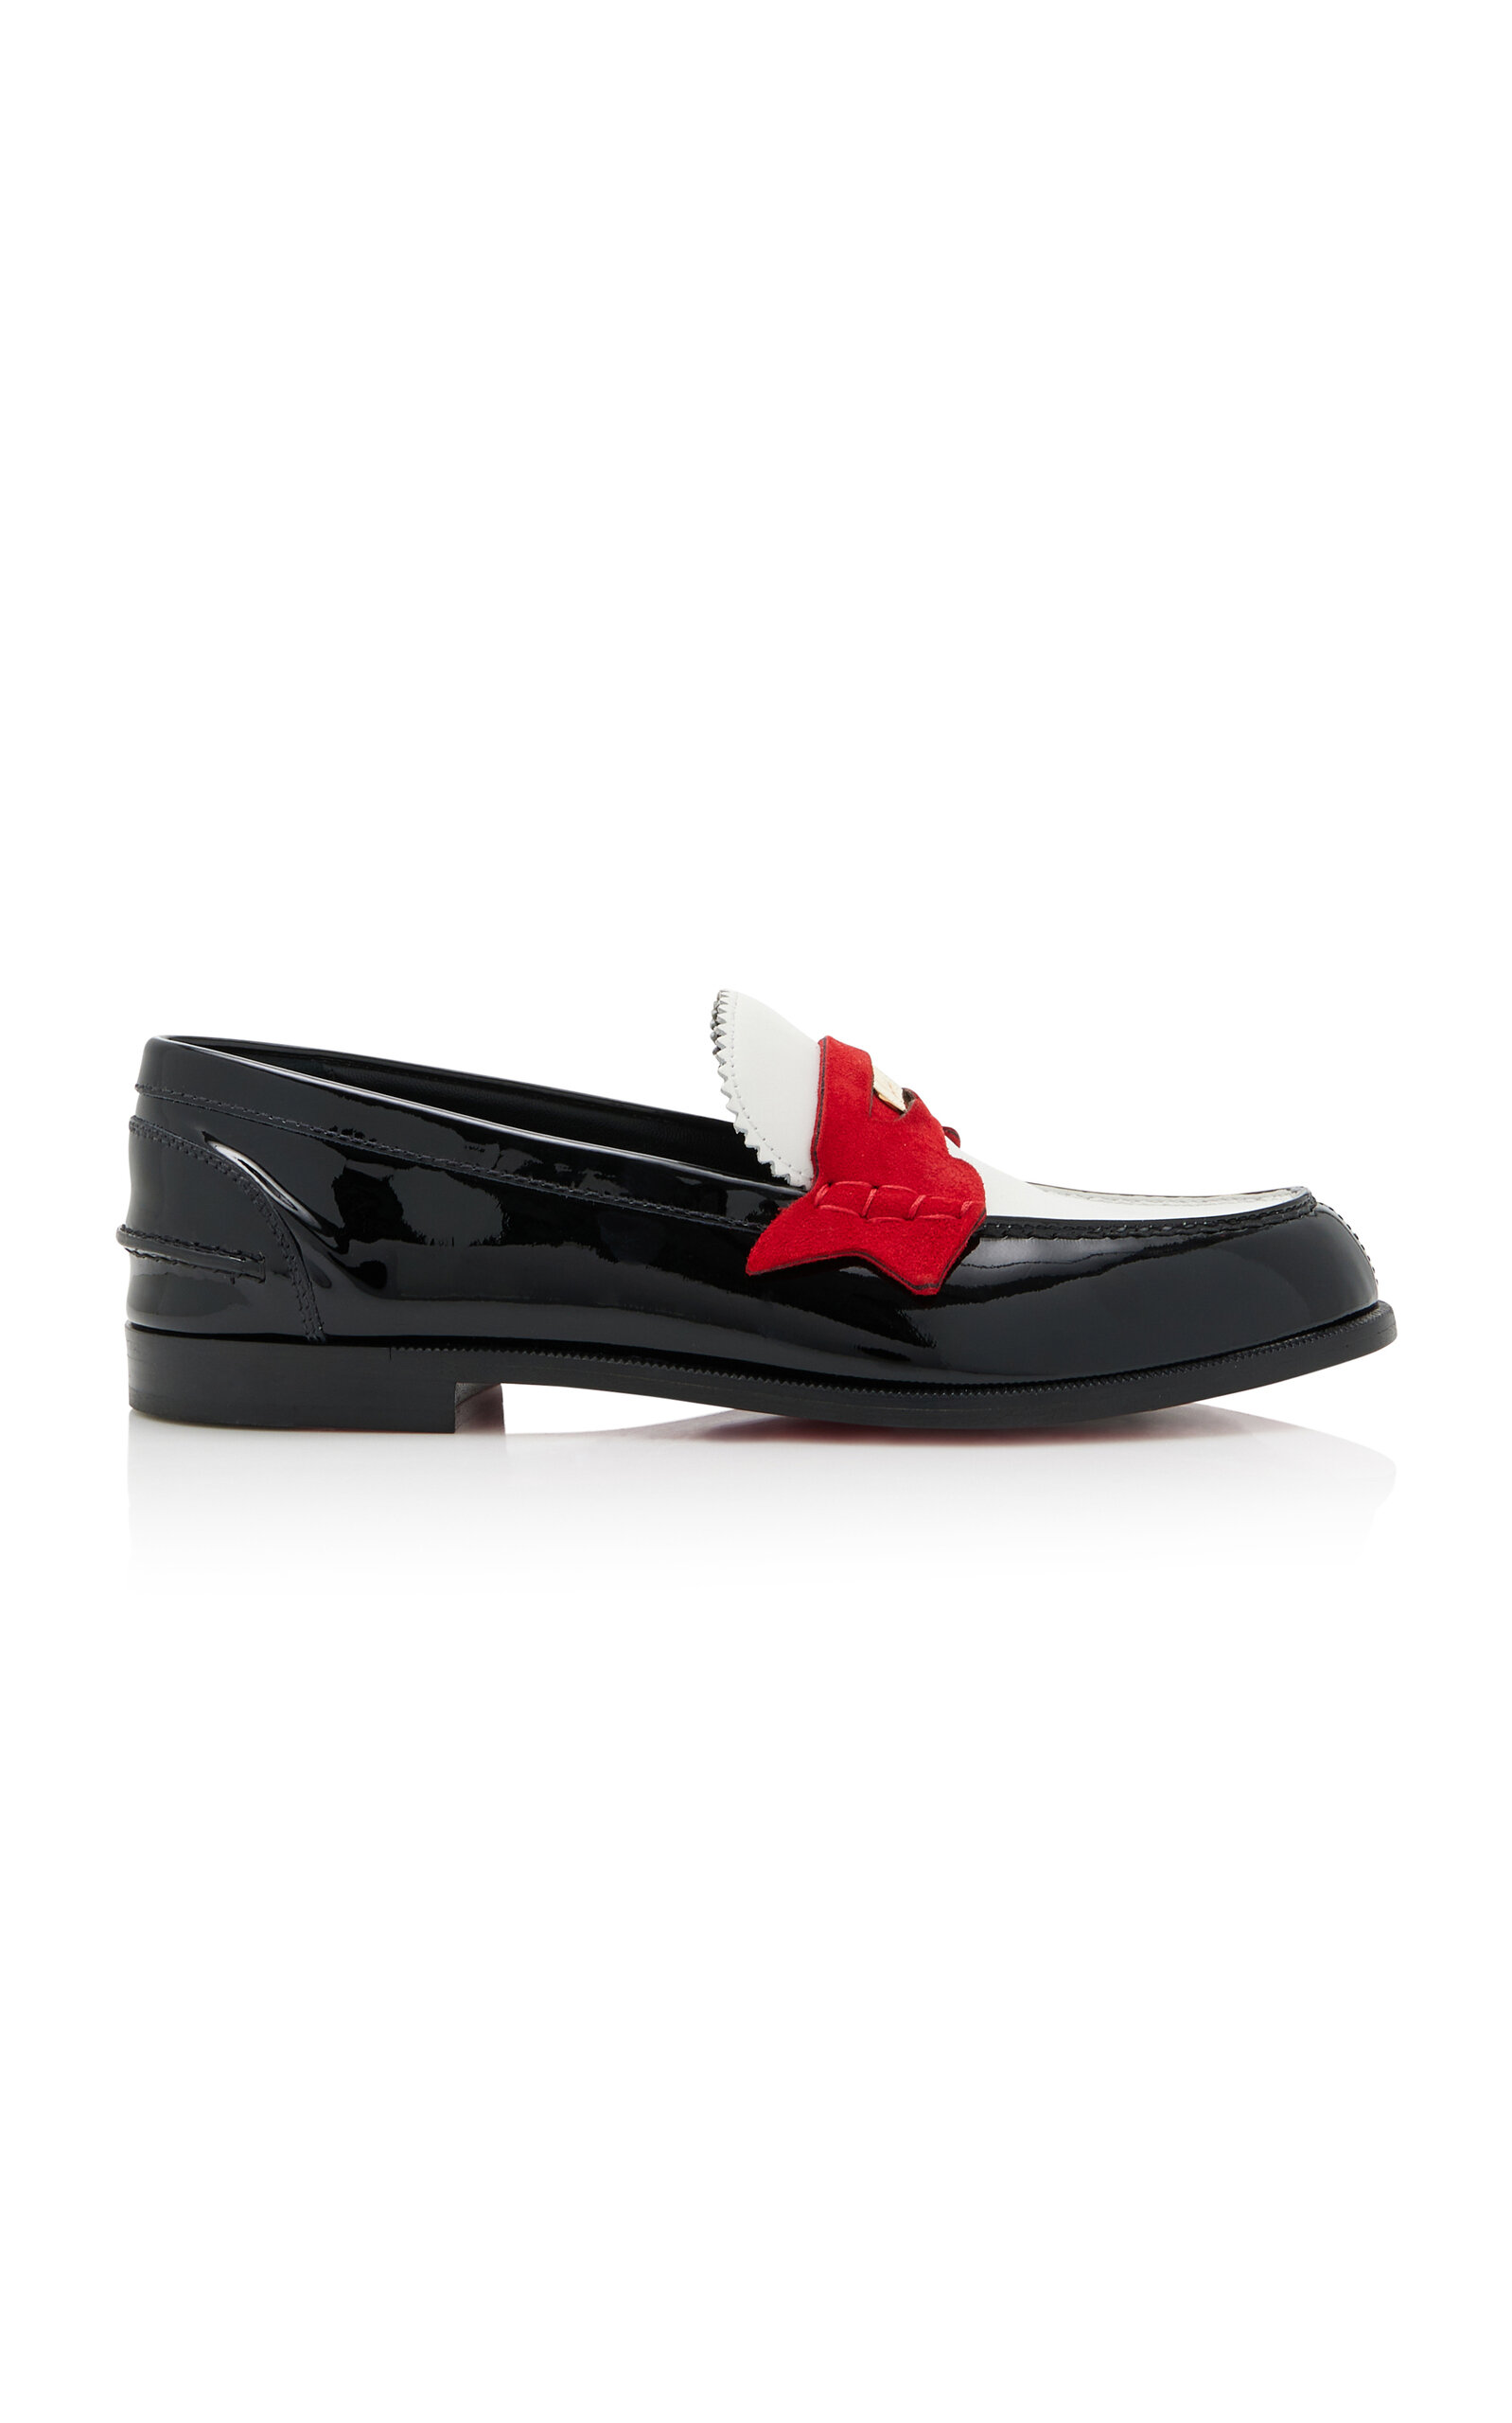 Christian Louboutin Women's Donna Leather Penny Loafers